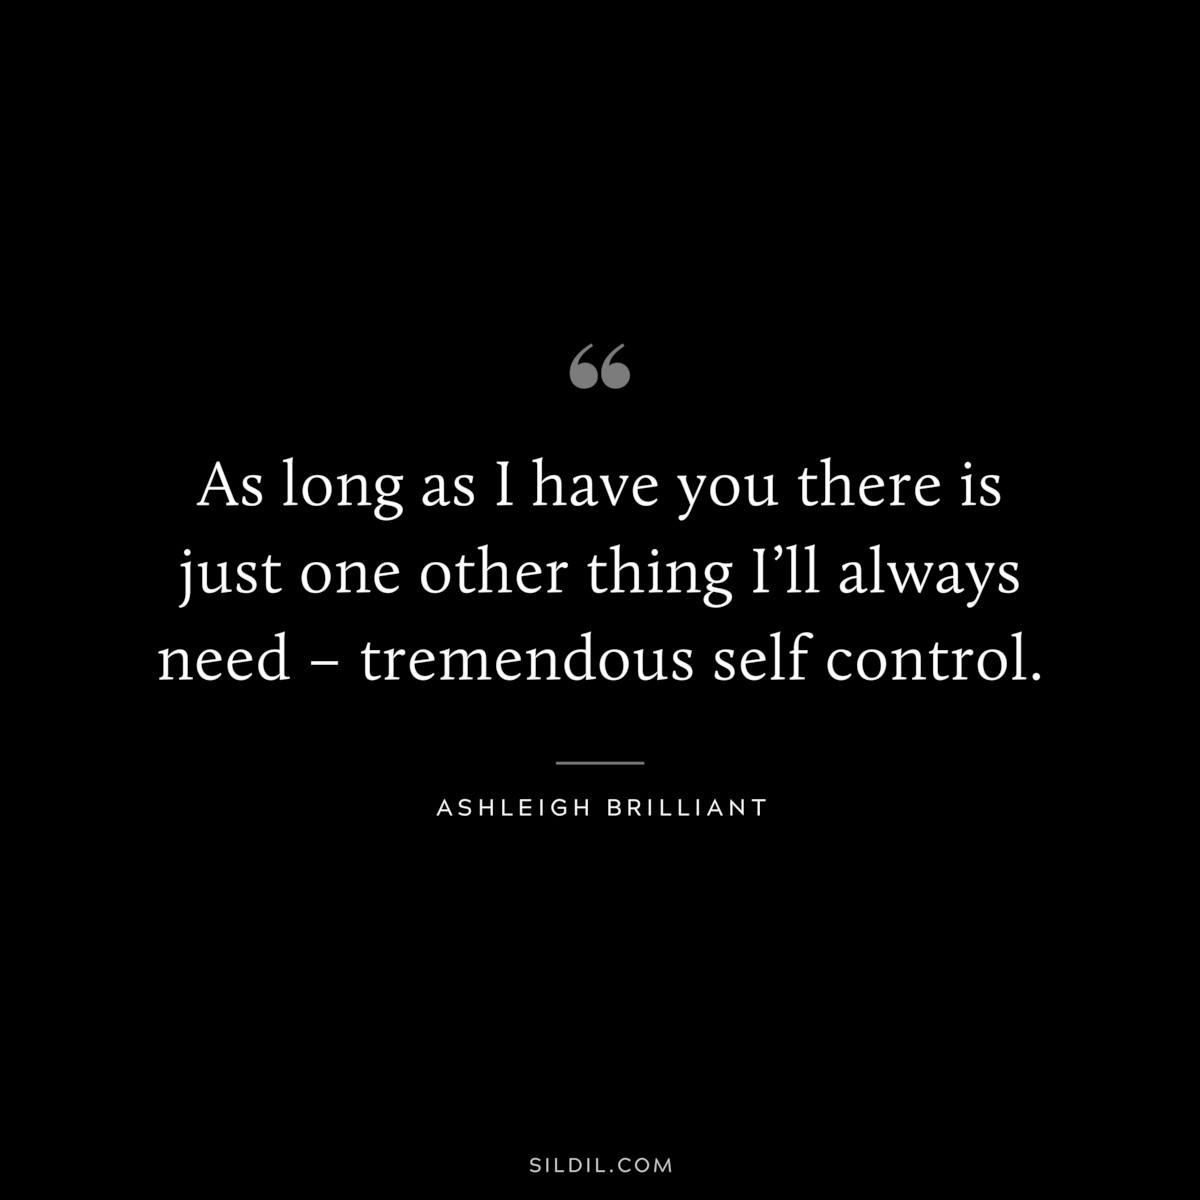 As long as I have you there is just one other thing I’ll always need – tremendous self control. ― Ashleigh Brilliant